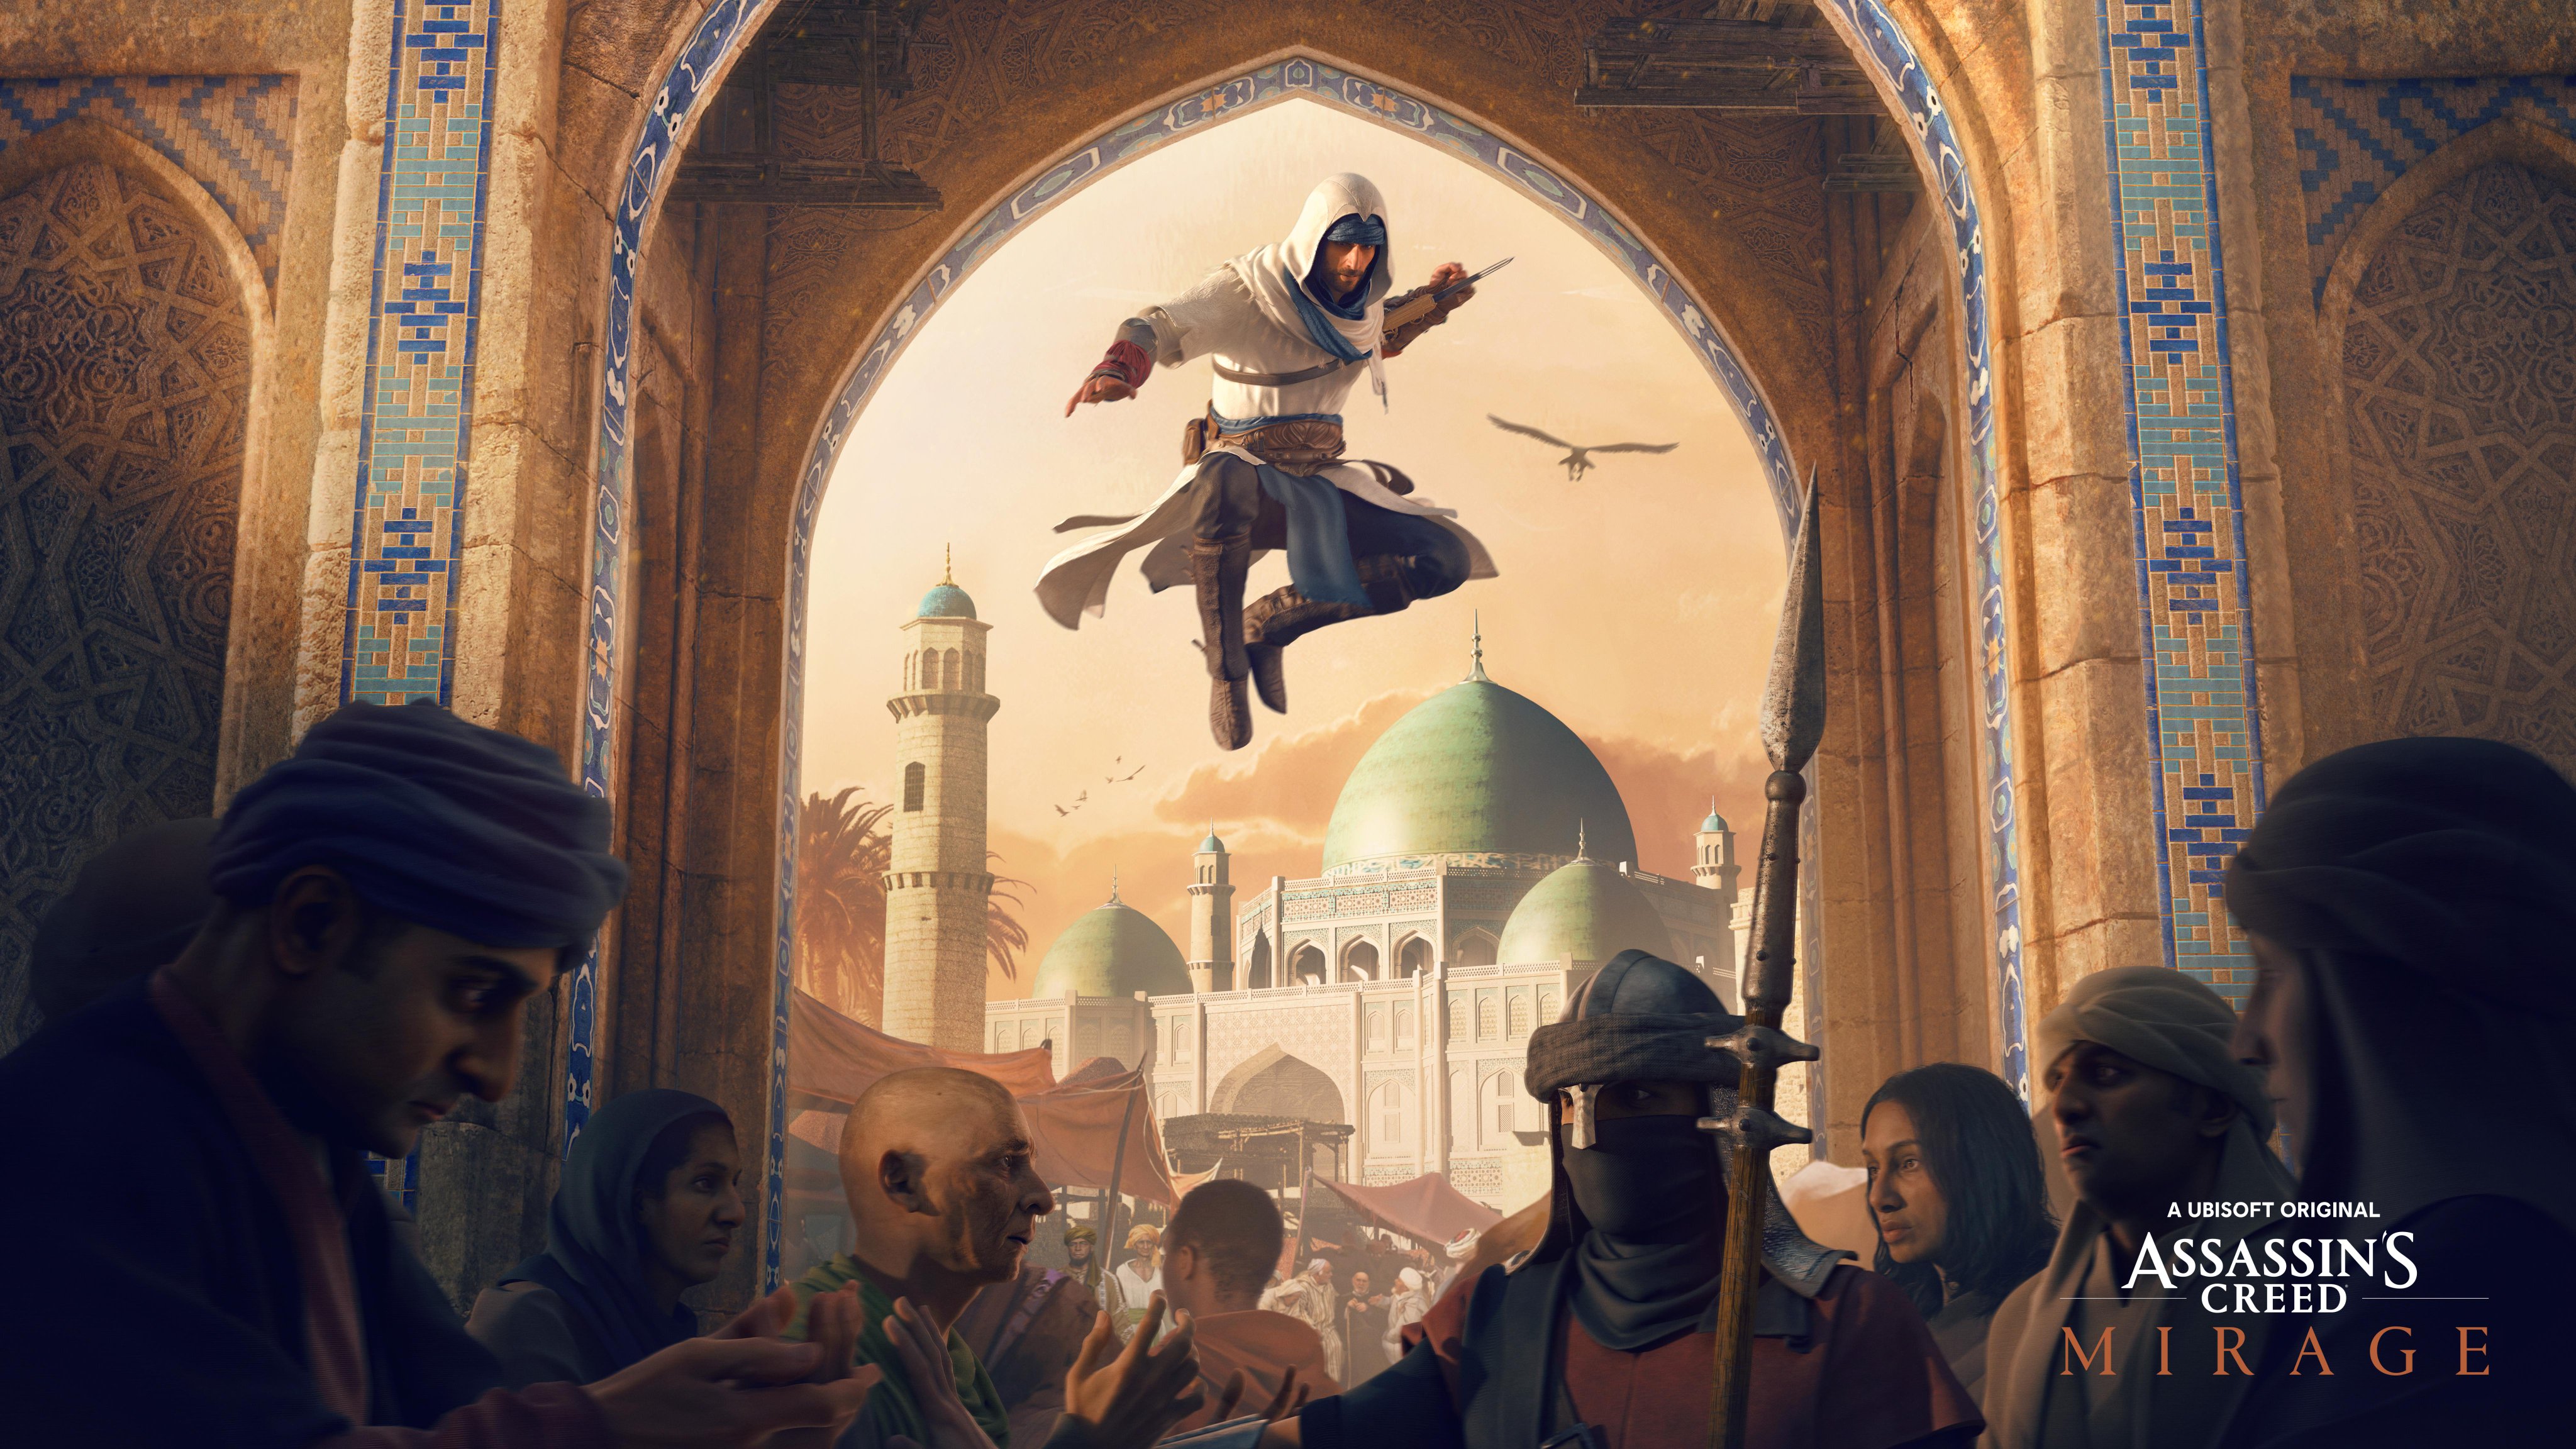 Basim leaps through an archway, wrist-blade extended, with his bird drone hovering behind him